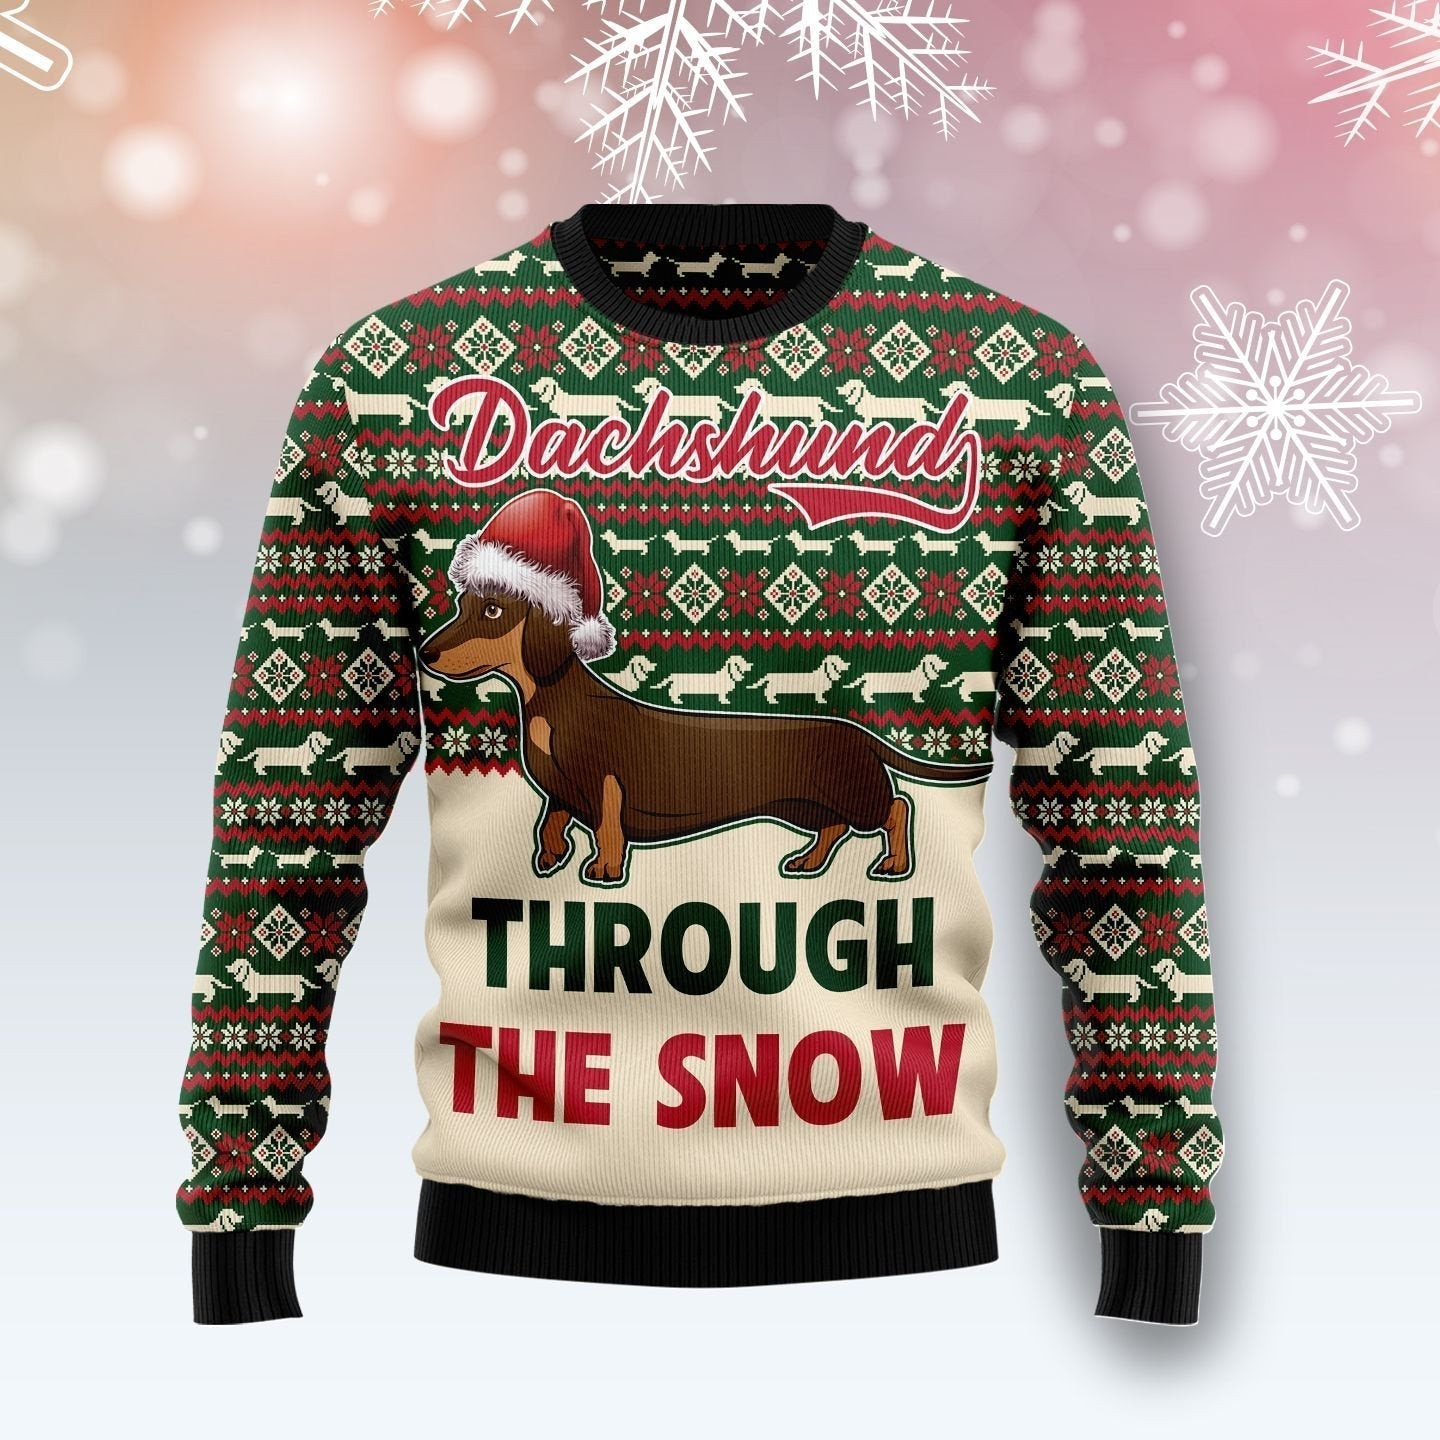 Dachshund Through The Snow Ugly Christmas Sweater Ugly Sweater For Men Women